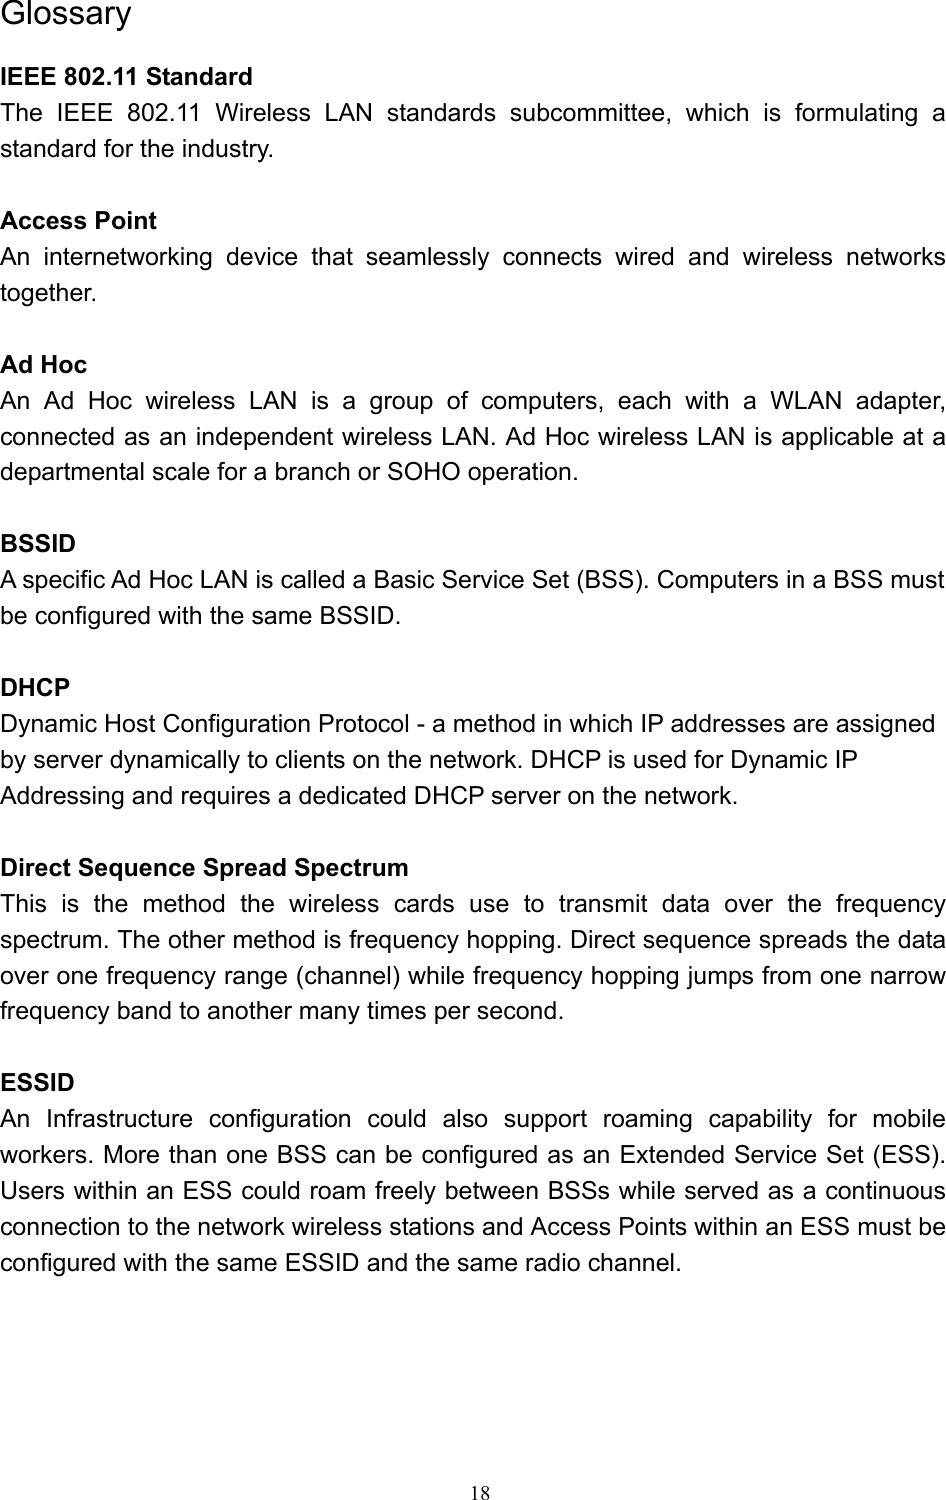   18 Glossary IEEE 802.11 Standard The IEEE 802.11 Wireless LAN standards subcommittee, which is formulating a standard for the industry.  Access Point An internetworking device that seamlessly connects wired and wireless networks together.  Ad Hoc   An Ad Hoc wireless LAN is a group of computers, each with a WLAN adapter, connected as an independent wireless LAN. Ad Hoc wireless LAN is applicable at a departmental scale for a branch or SOHO operation.  BSSID A specific Ad Hoc LAN is called a Basic Service Set (BSS). Computers in a BSS must be configured with the same BSSID.  DHCP Dynamic Host Configuration Protocol - a method in which IP addresses are assigned by server dynamically to clients on the network. DHCP is used for Dynamic IP Addressing and requires a dedicated DHCP server on the network.  Direct Sequence Spread Spectrum This is the method the wireless cards use to transmit data over the frequency spectrum. The other method is frequency hopping. Direct sequence spreads the data over one frequency range (channel) while frequency hopping jumps from one narrow frequency band to another many times per second.  ESSID An Infrastructure configuration could also support roaming capability for mobile workers. More than one BSS can be configured as an Extended Service Set (ESS). Users within an ESS could roam freely between BSSs while served as a continuous connection to the network wireless stations and Access Points within an ESS must be configured with the same ESSID and the same radio channel.    